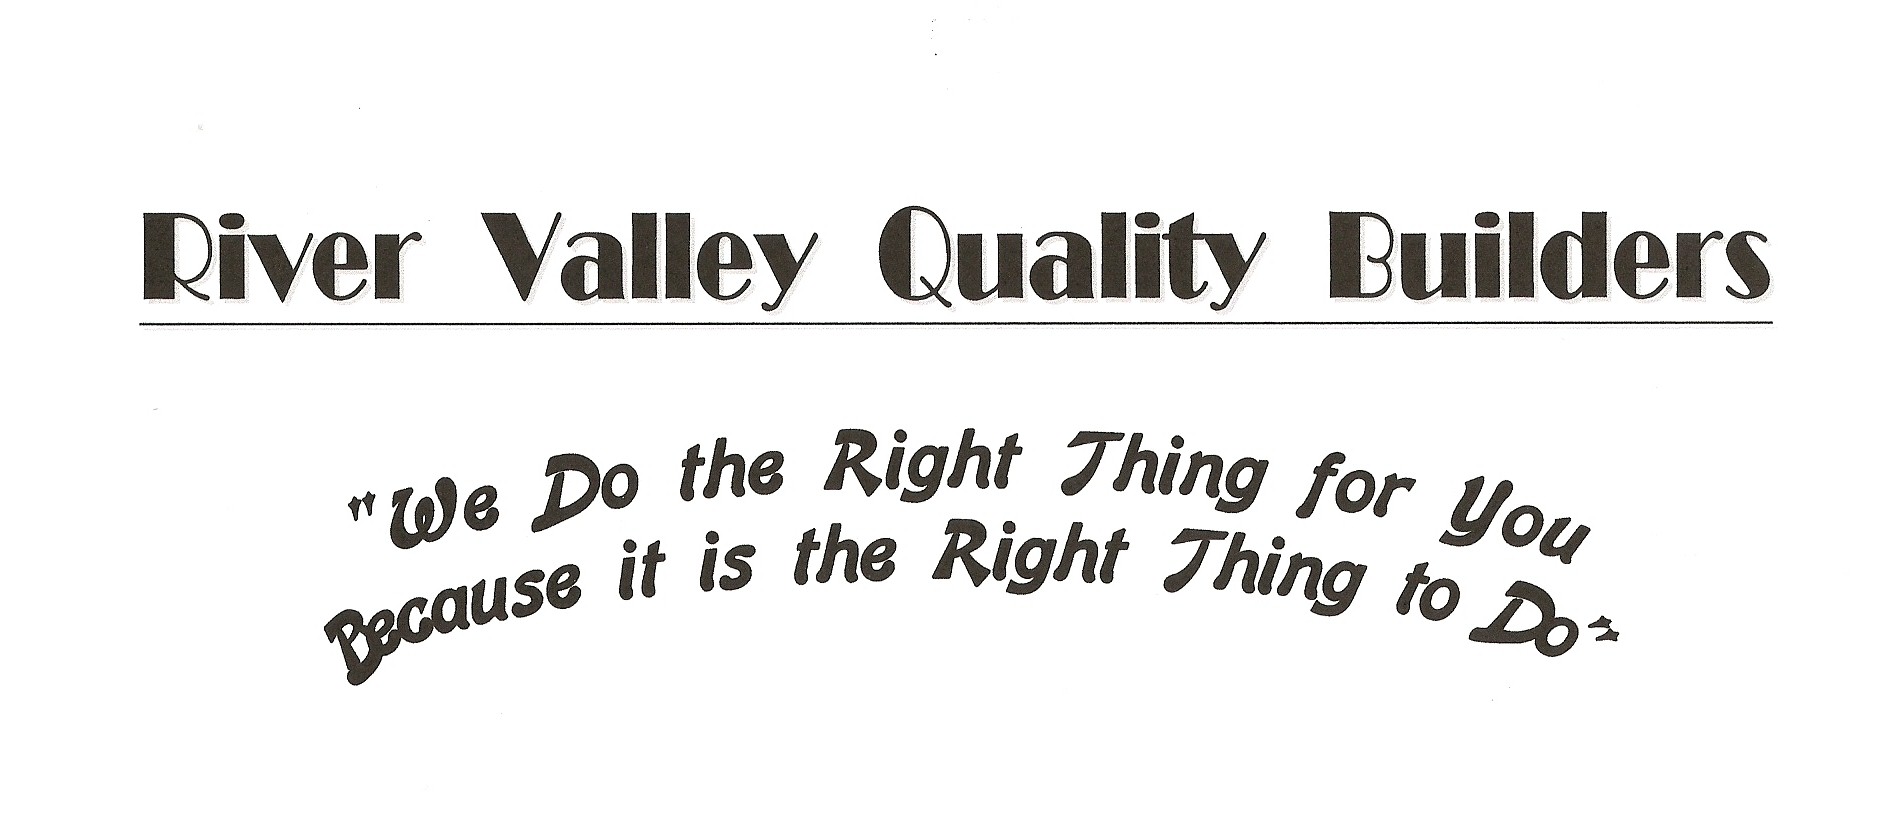 River Valley Quality Builders